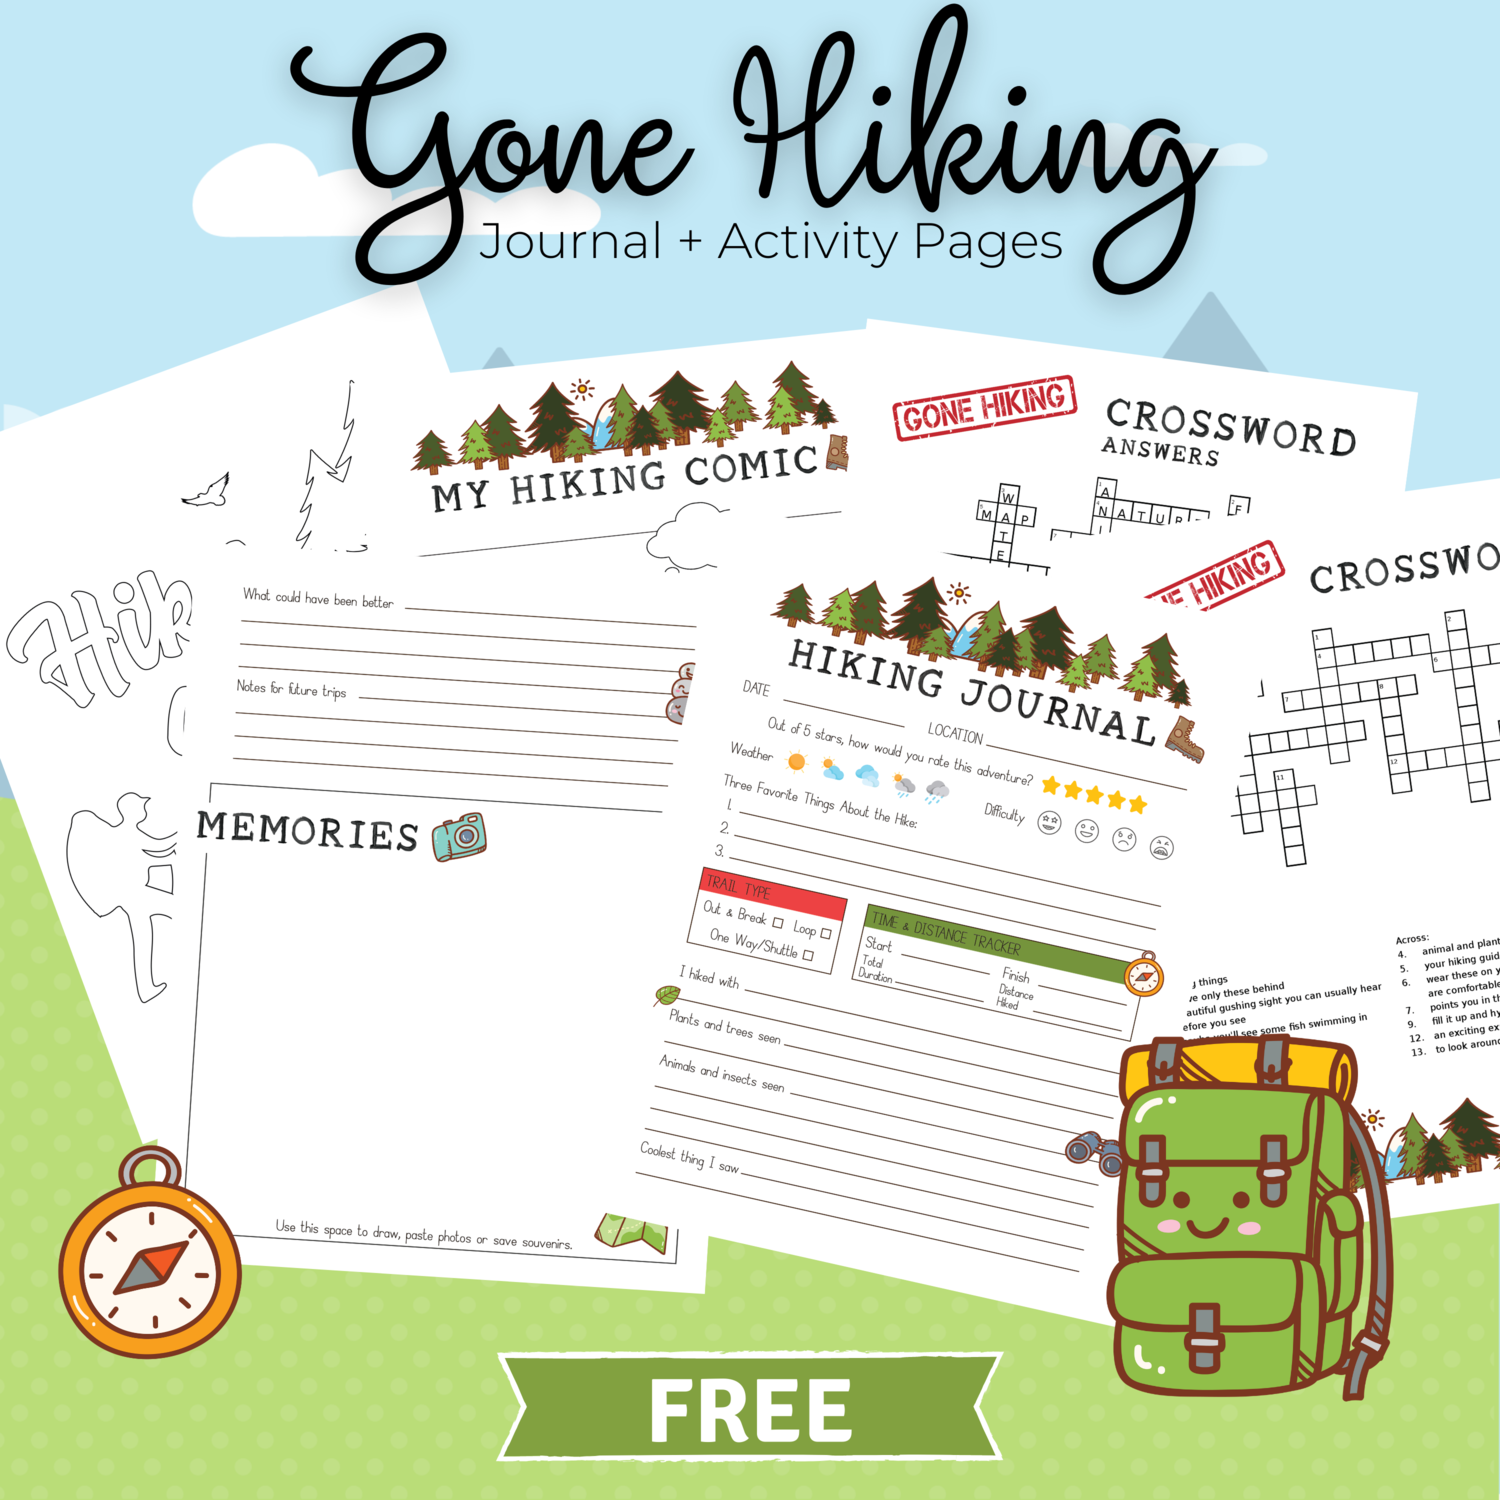 Gone Hiking Journal + Activities Bundle for Kids